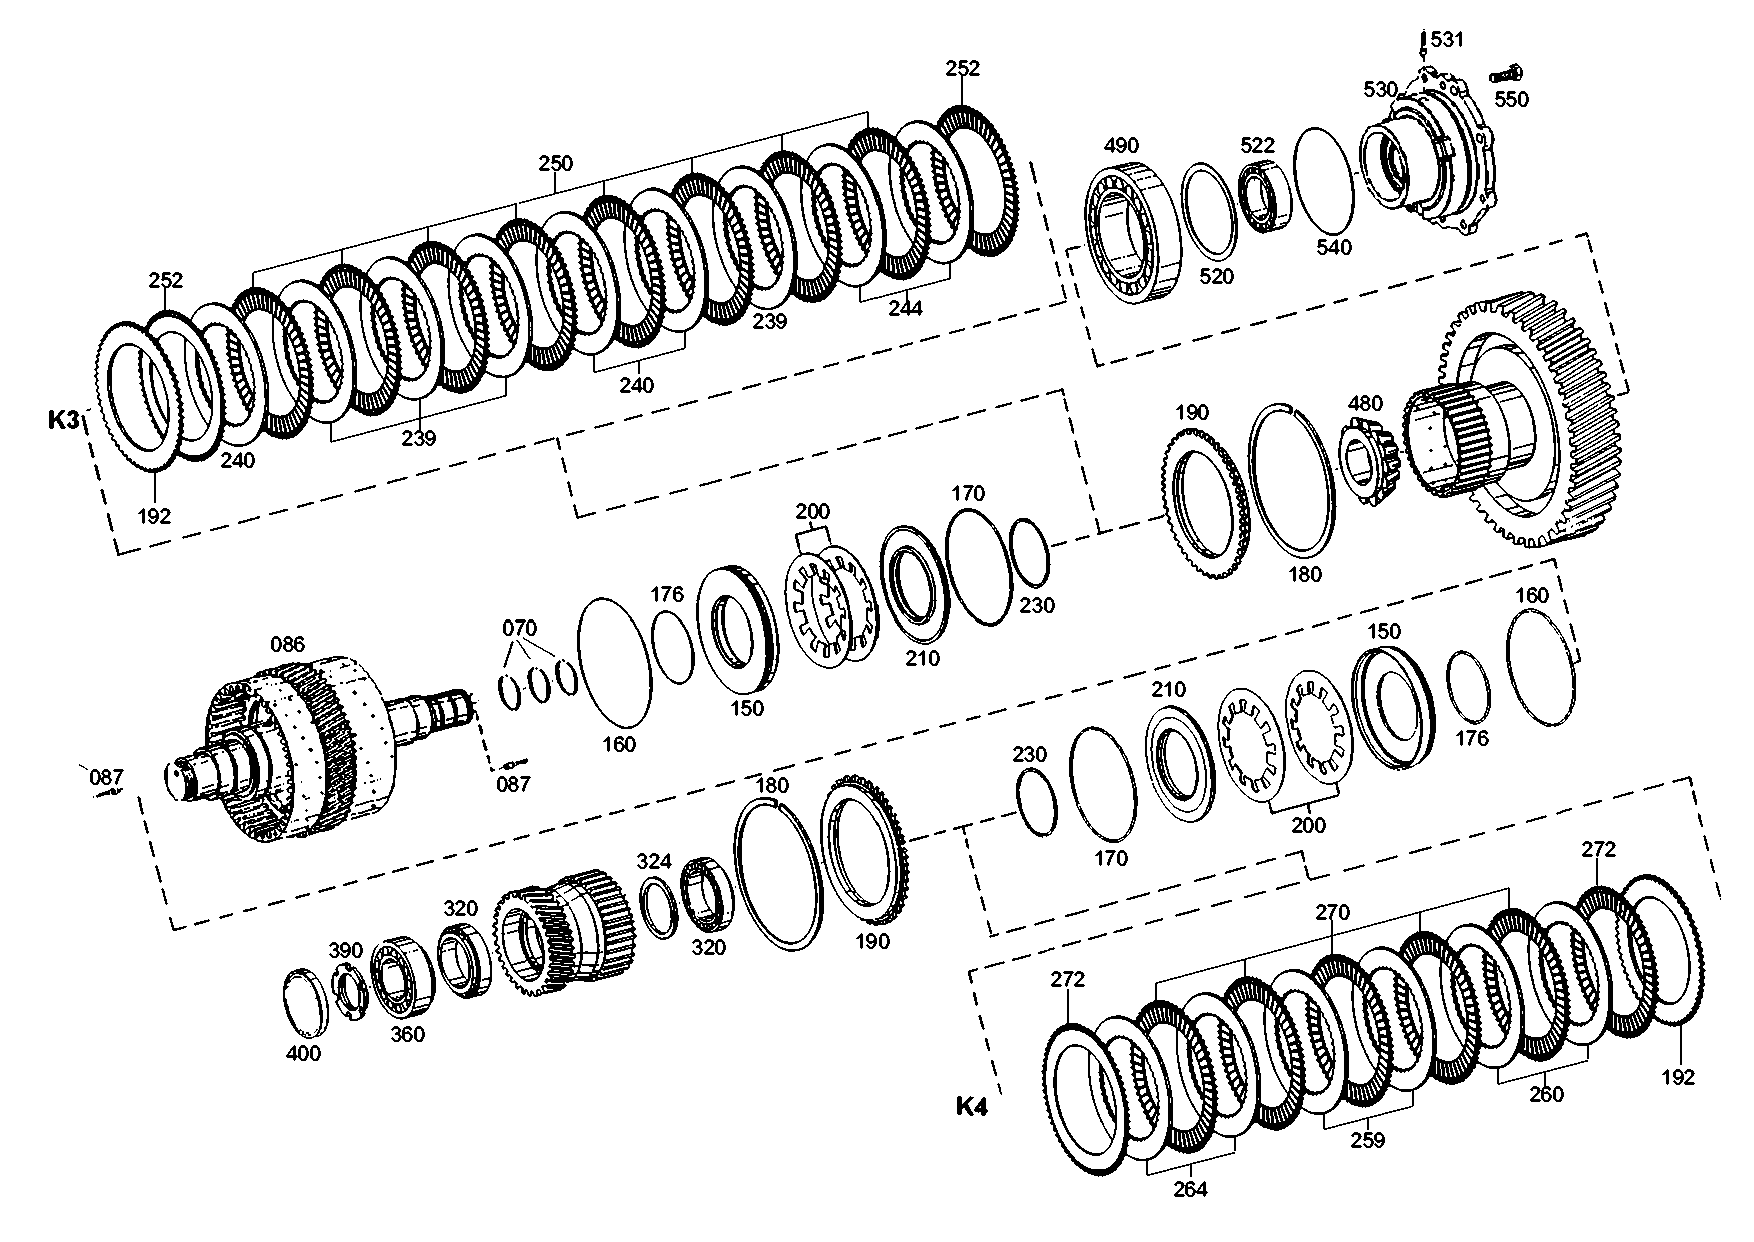 drawing for CASE CORPORATION 387179A1 - SNAP RING (figure 1)